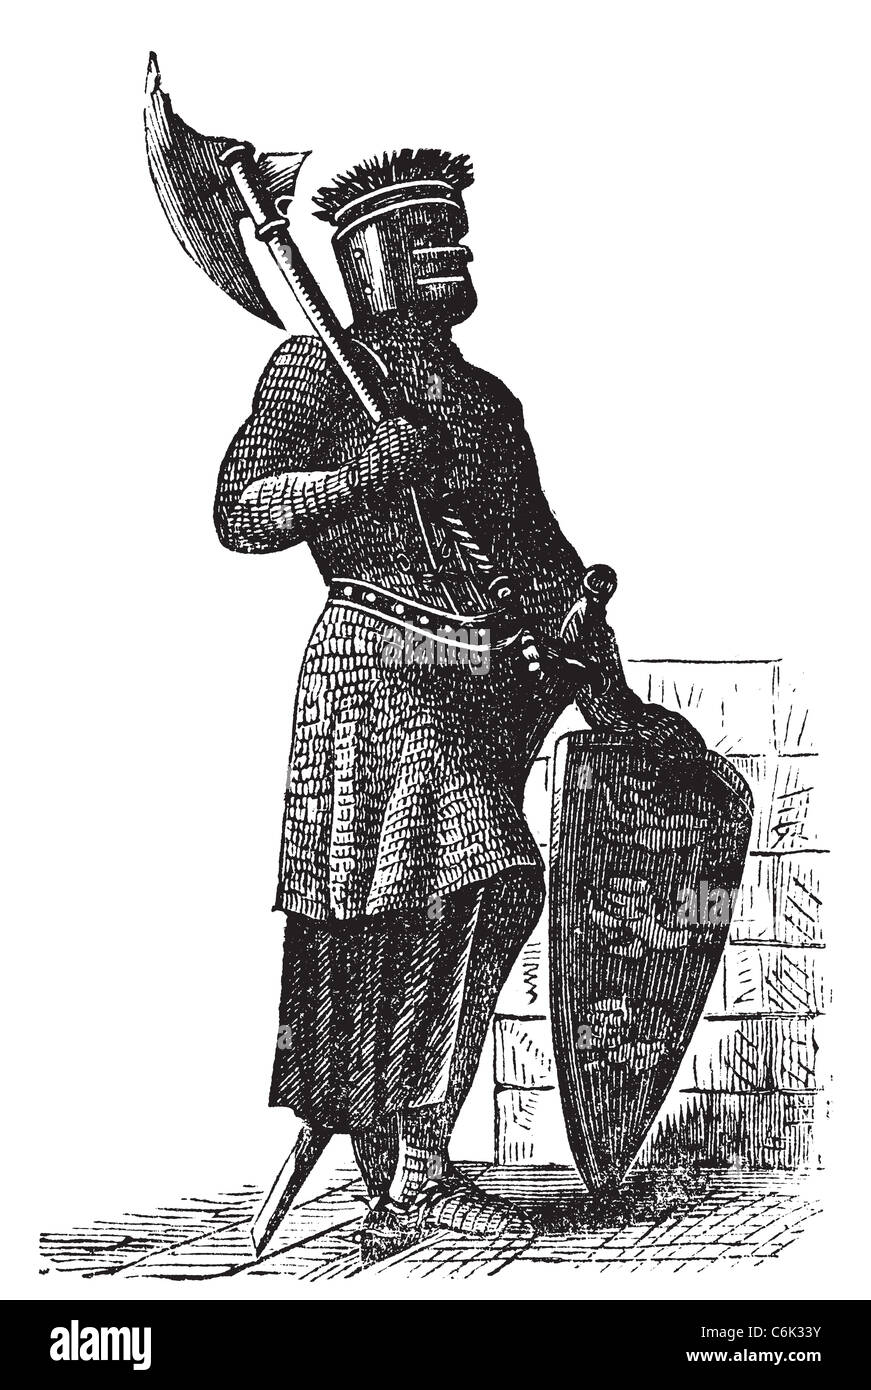 Armor and weapons during the first Crusades era, old engraving. Vector, engraved illustration of Crusade knight, in mail armor. Stock Photo